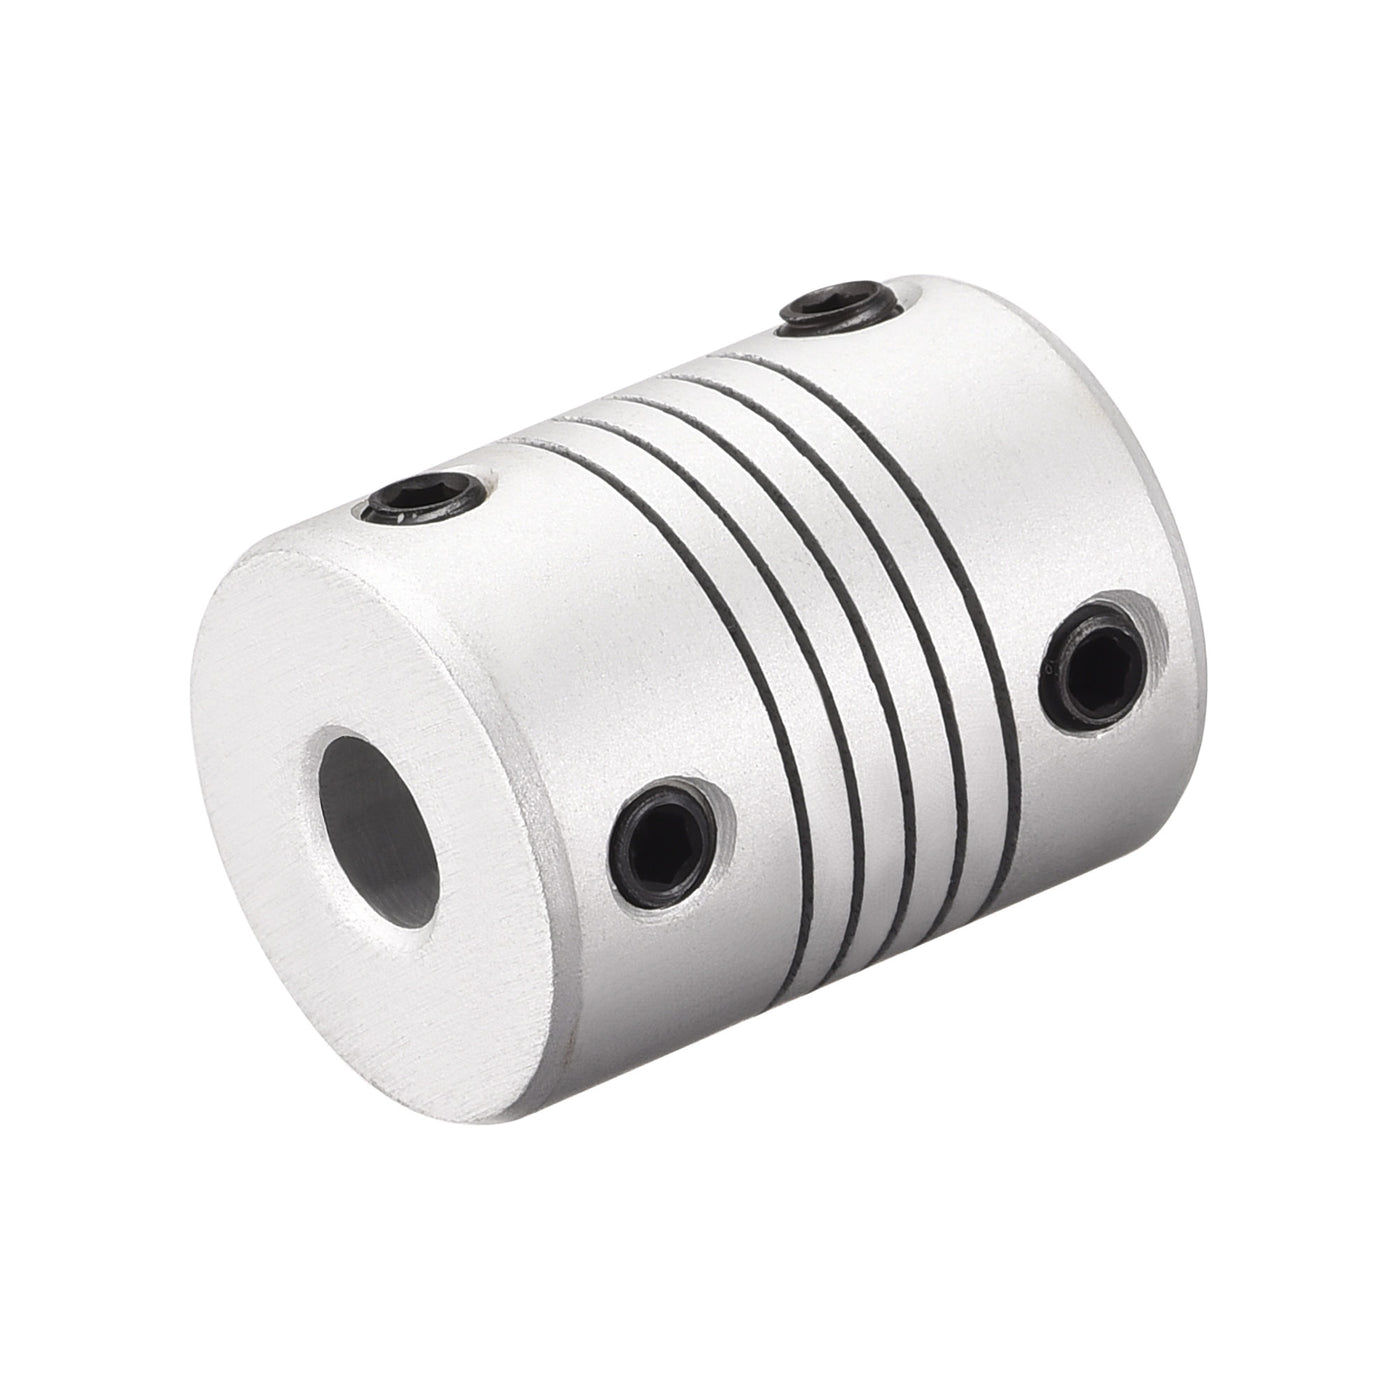 uxcell Uxcell 8mm to 8mm Aluminum Alloy Shaft Coupling Flexible Coupler L25xD19 Silver,2pcs